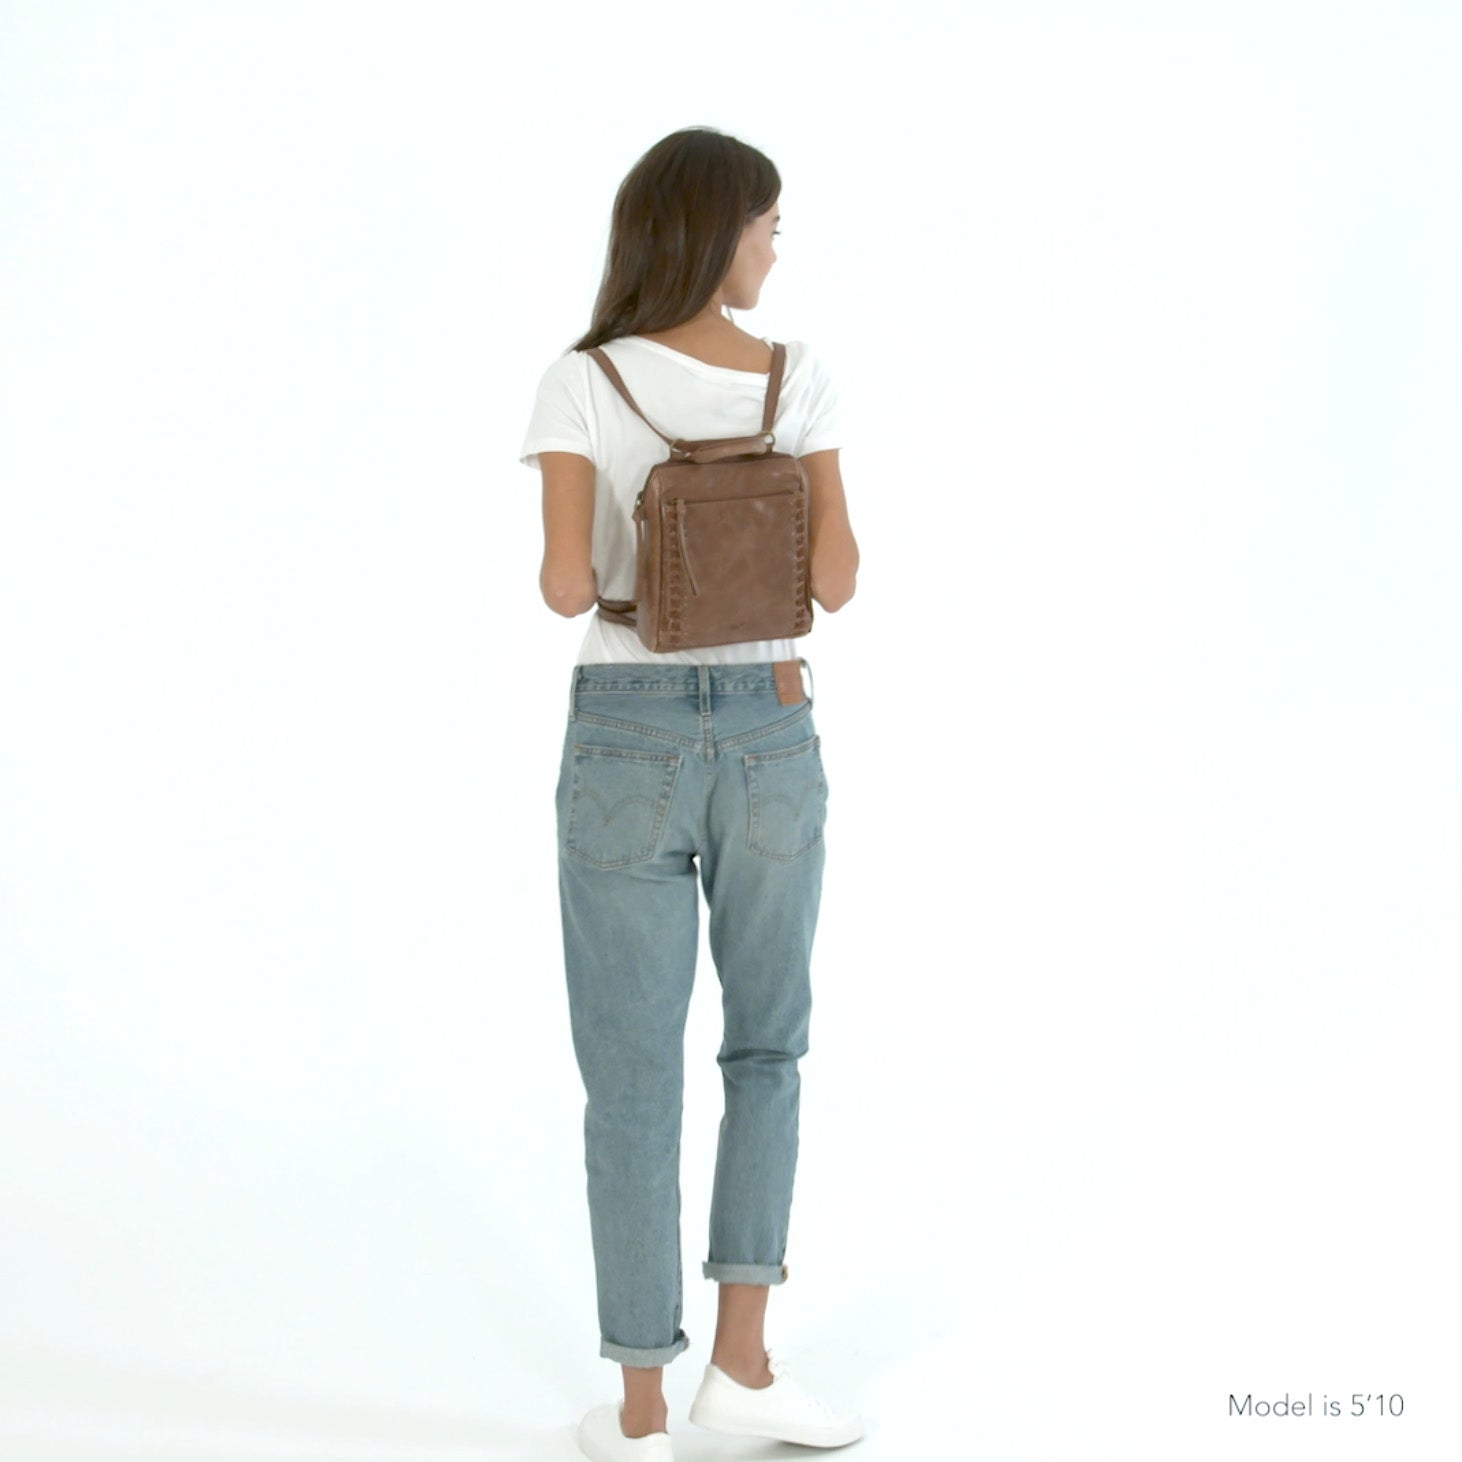 backpack with lockable zippers